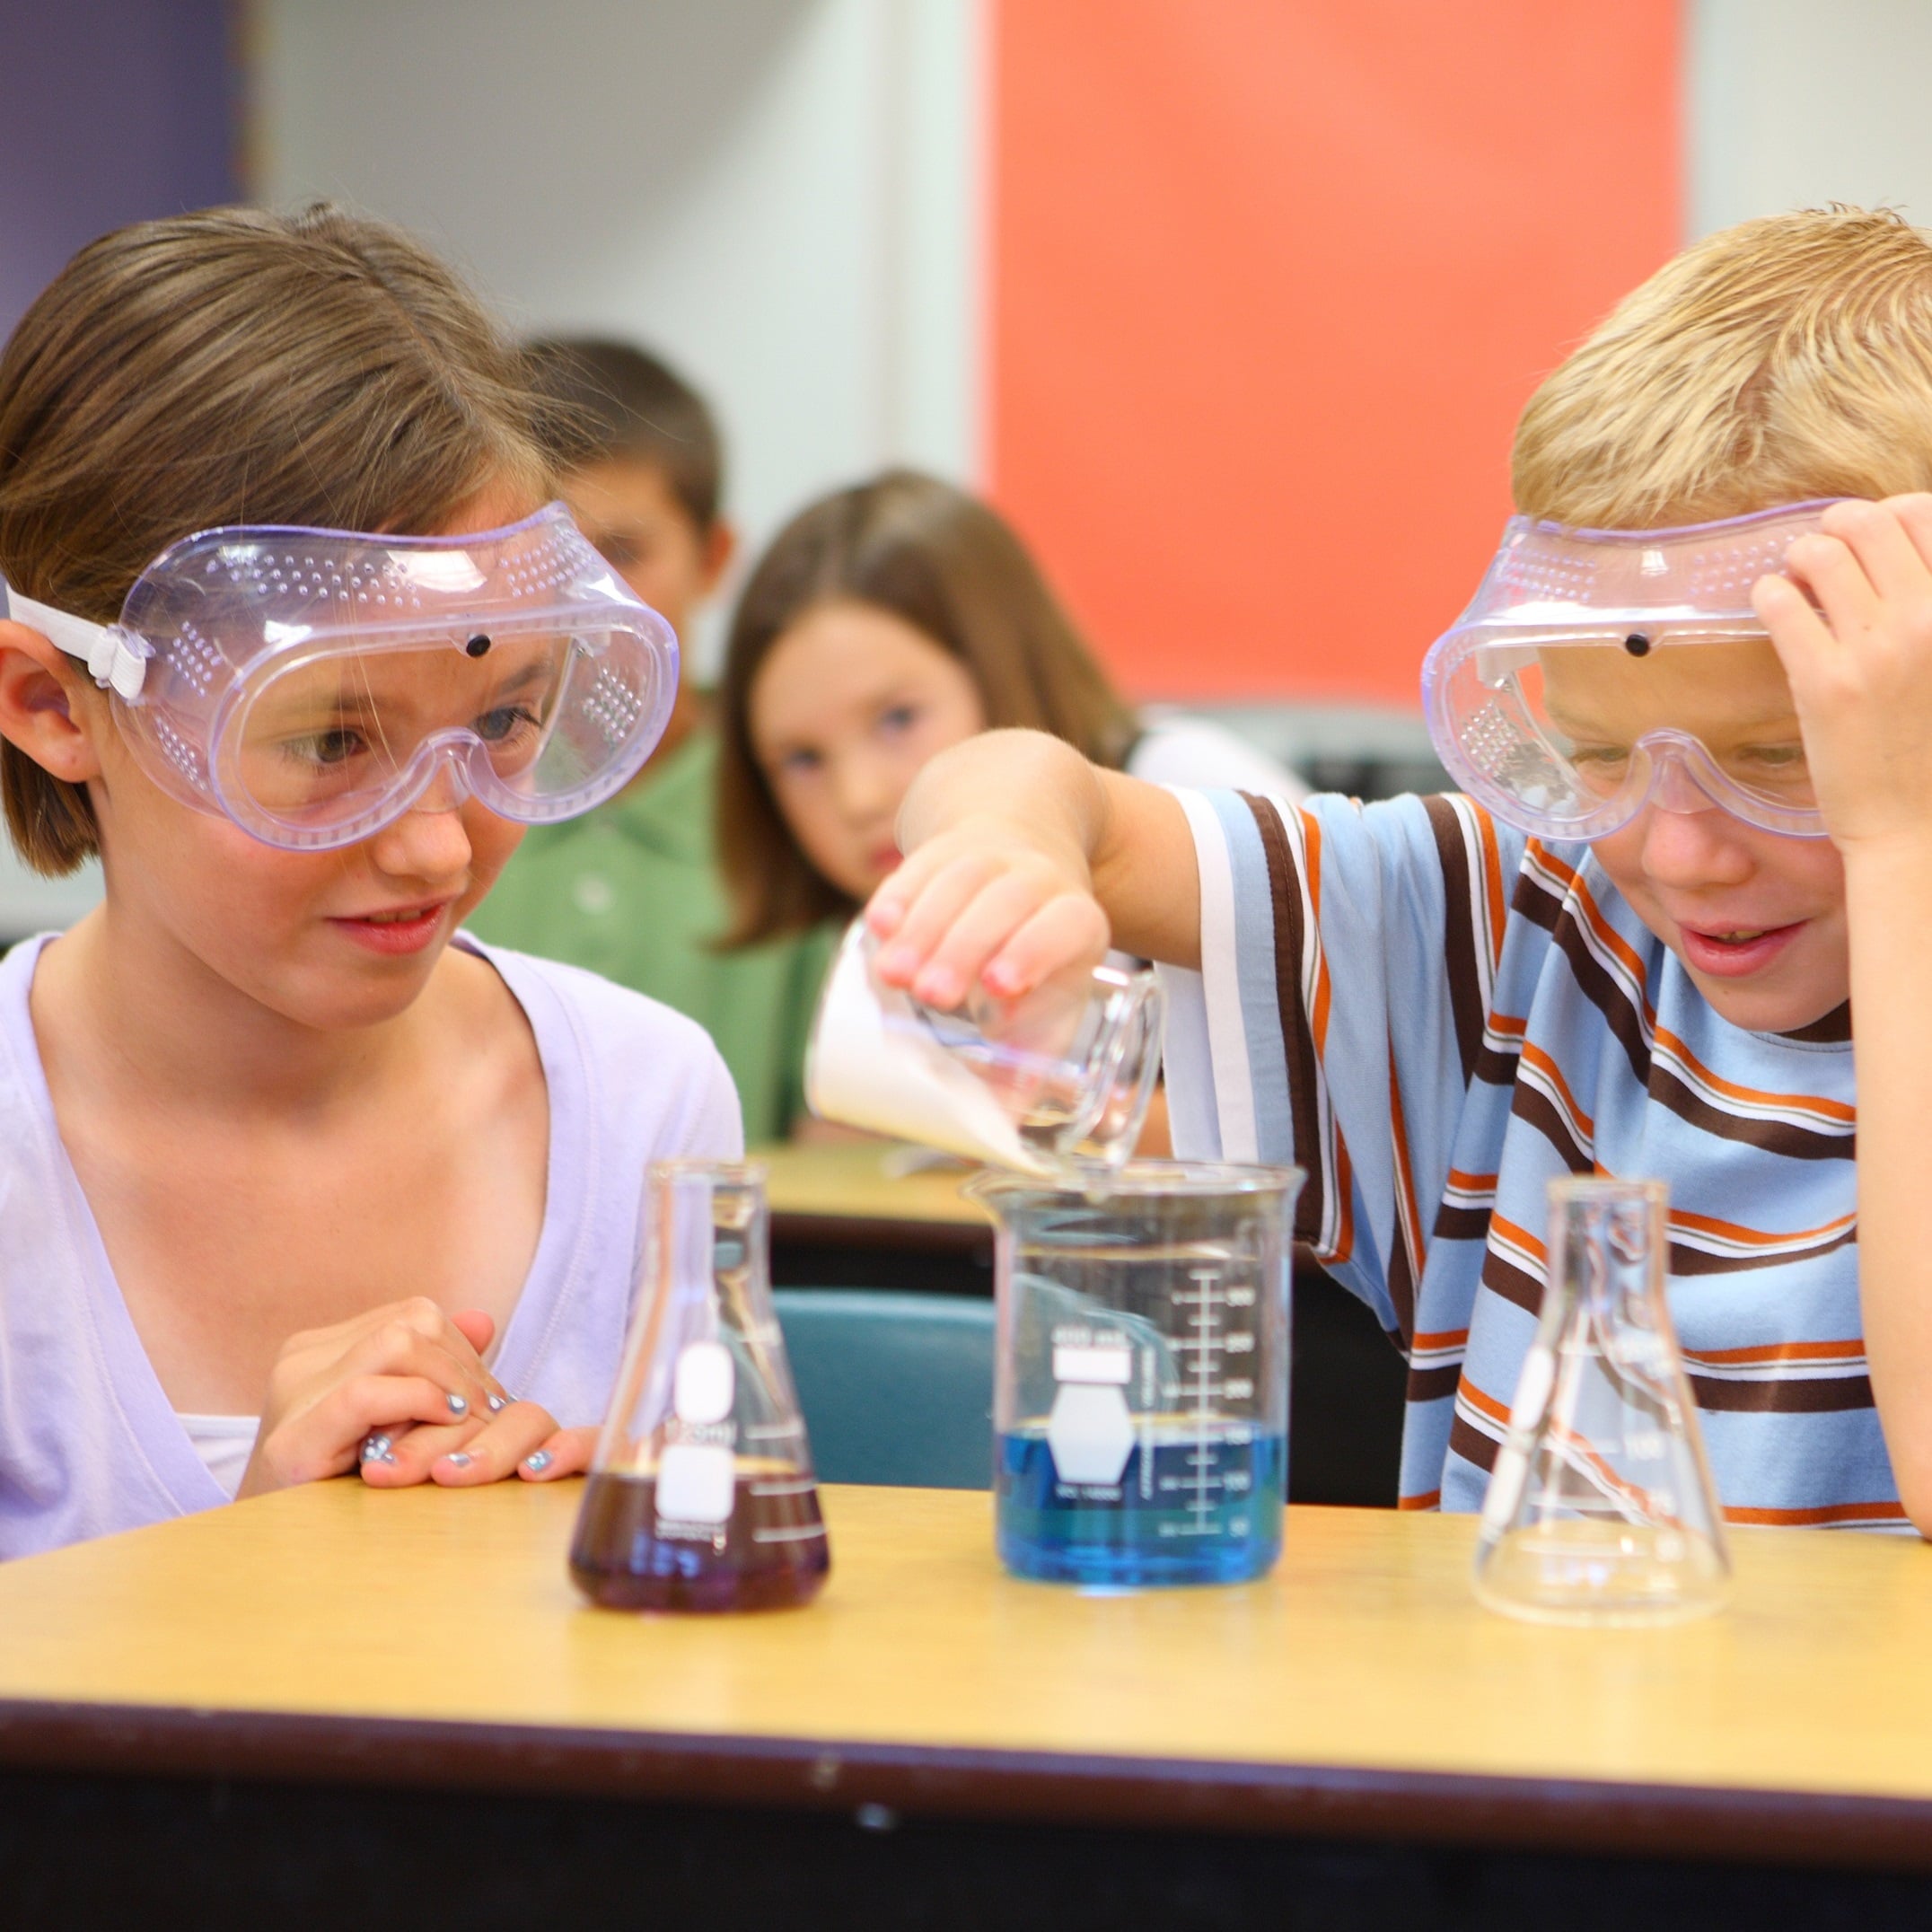 primary children undertaking ascience experiment involving two chemicals